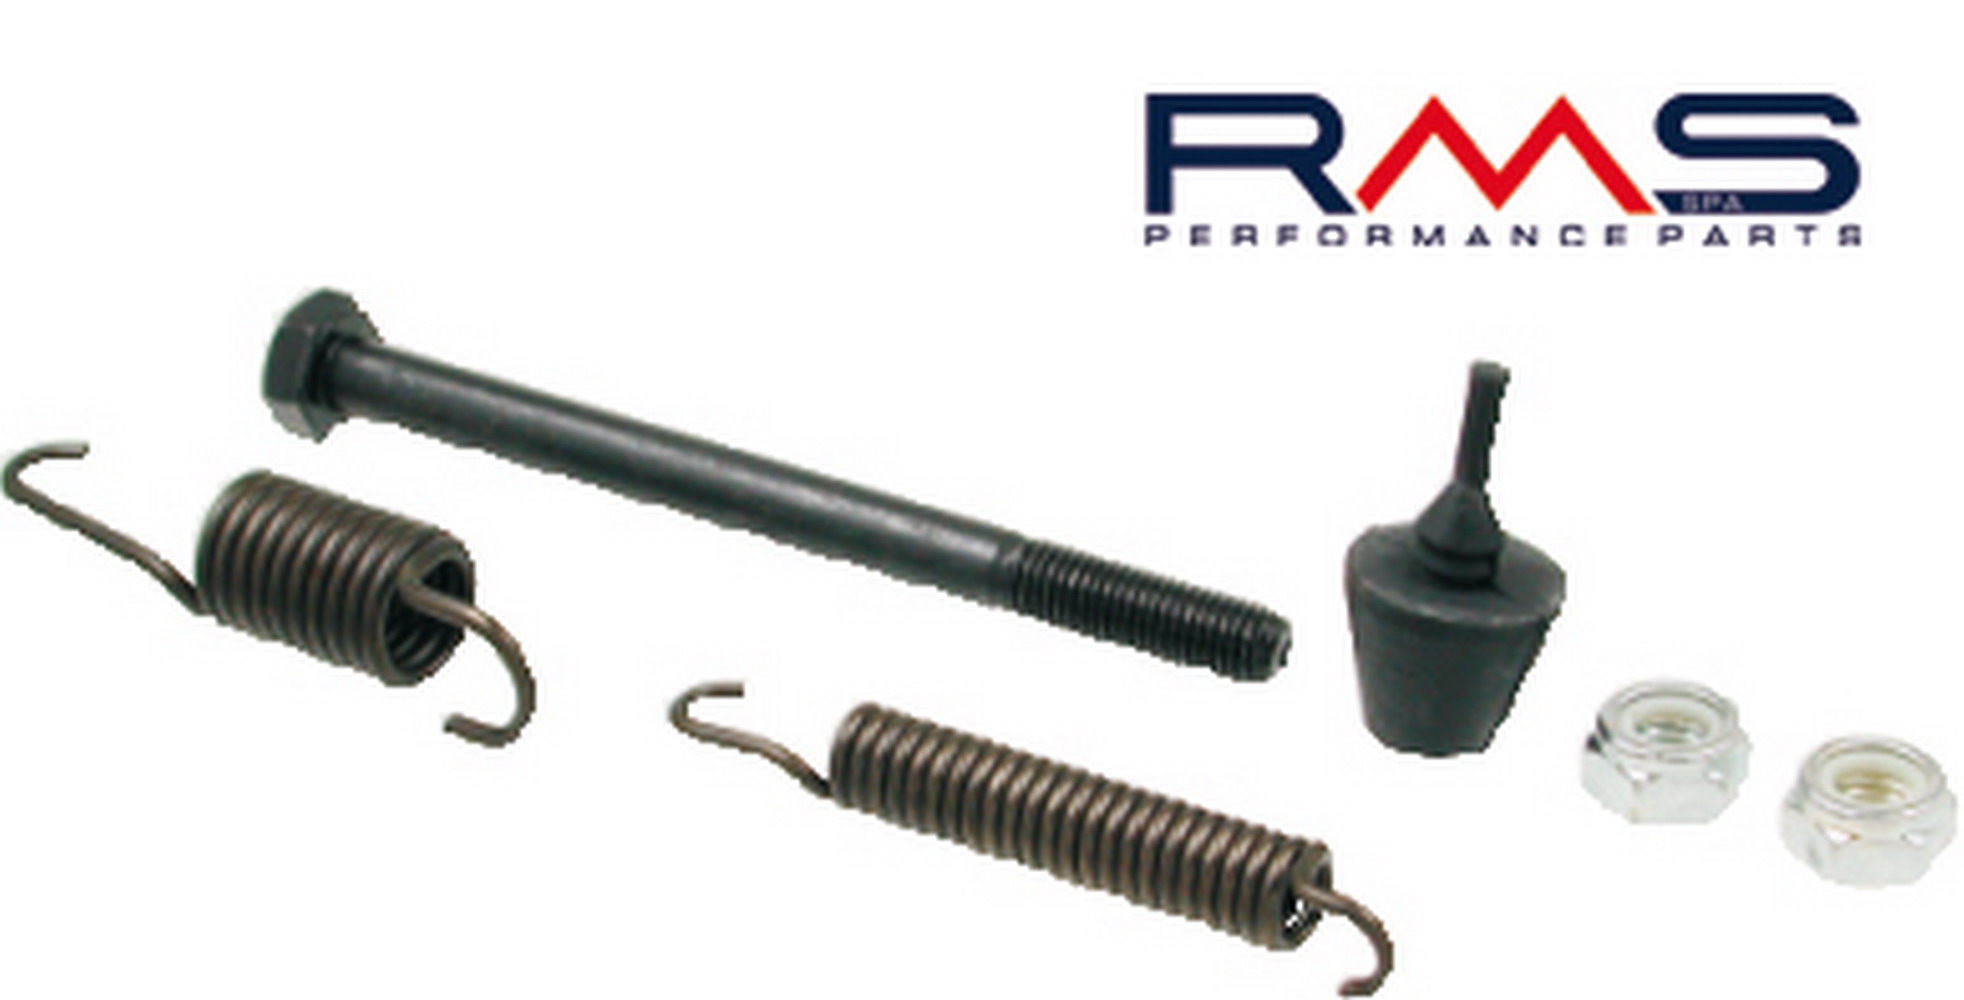 Obrázek produktu Central stand spring and pin kit RMS 121619060